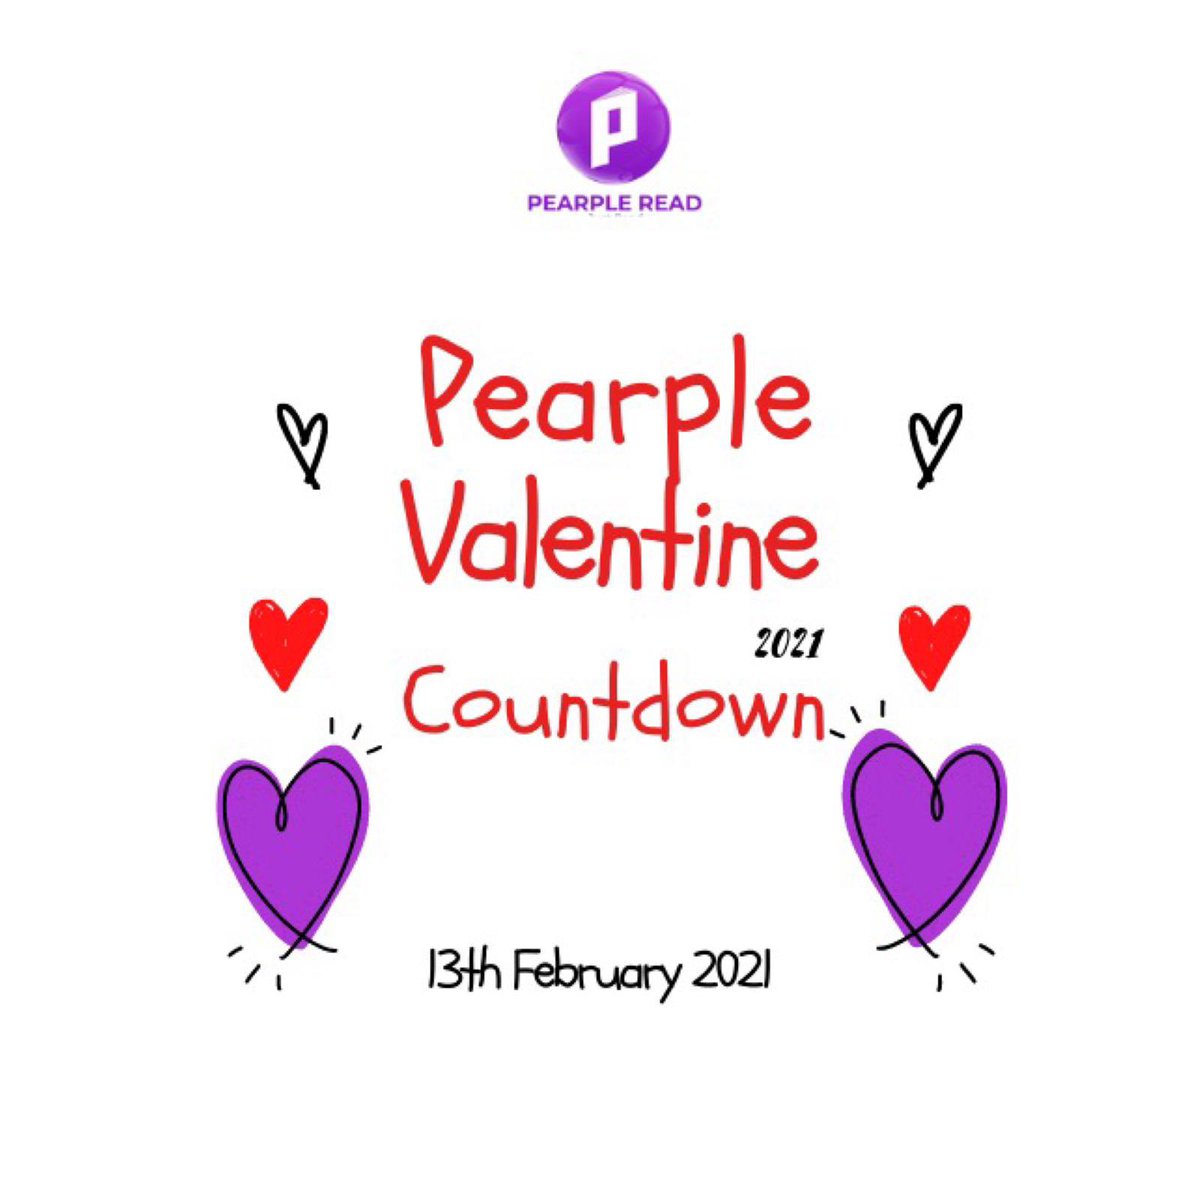 Happy New Month. The countdown to Pearple Valentine Book Donation has began !

#12daysmore #pearplevalentine #bookdonation #bookgiveaway #bookstagram
#SDG4 #fortheloveofreading #literacyadvocate #monthoflove